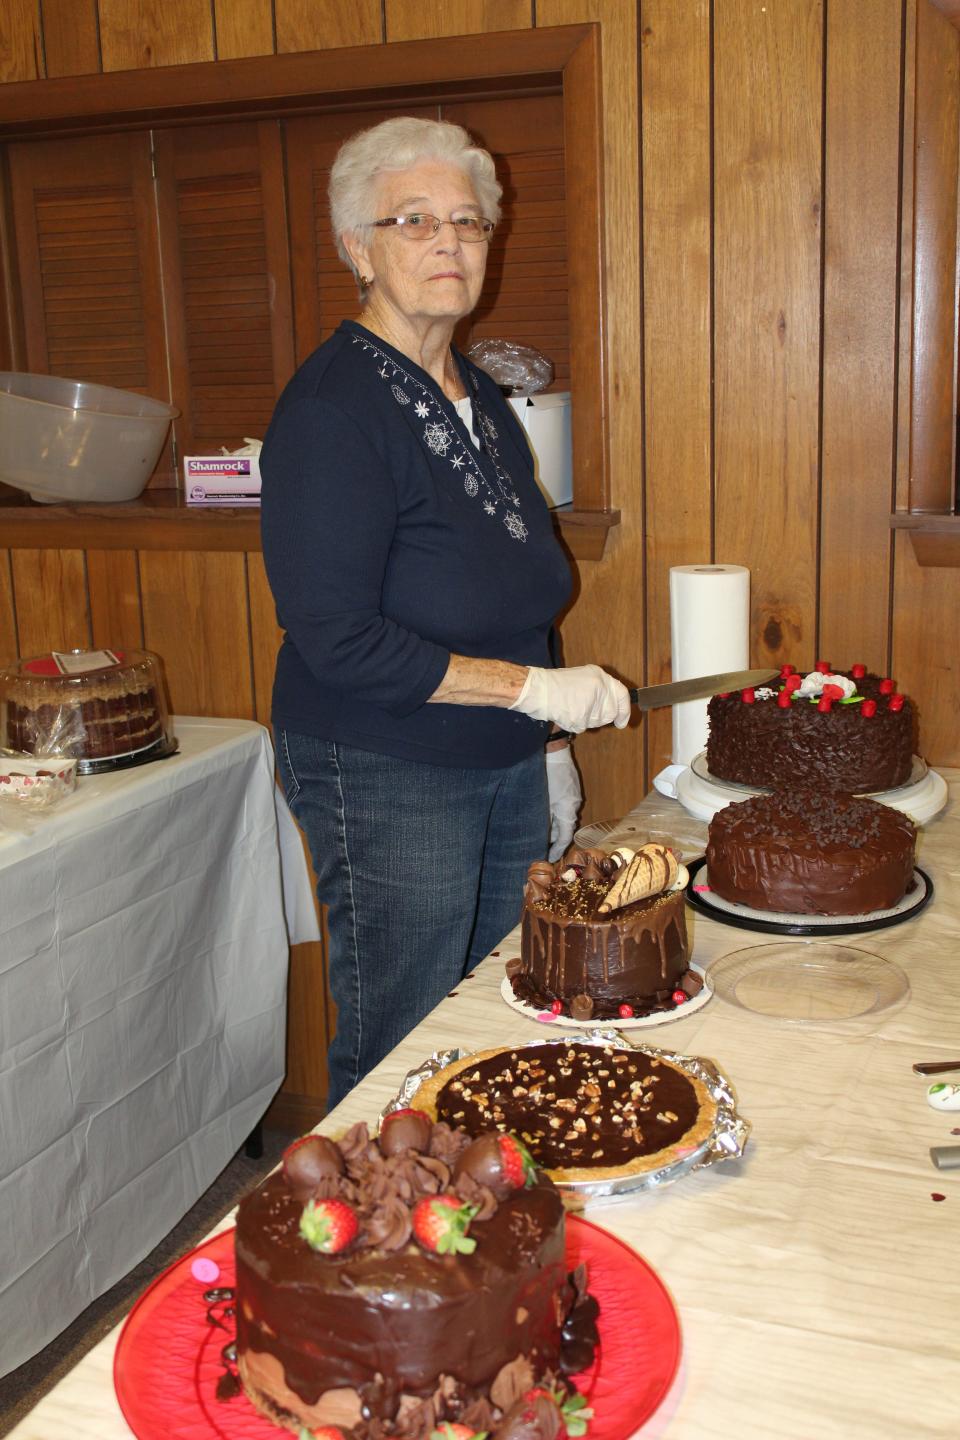 Almeda Miller of Meyersdale was back for the 2023 Death By Chocolate event to be the official cake cutter. Miller has baked cakes for this event in the past and won third place in candy this year.